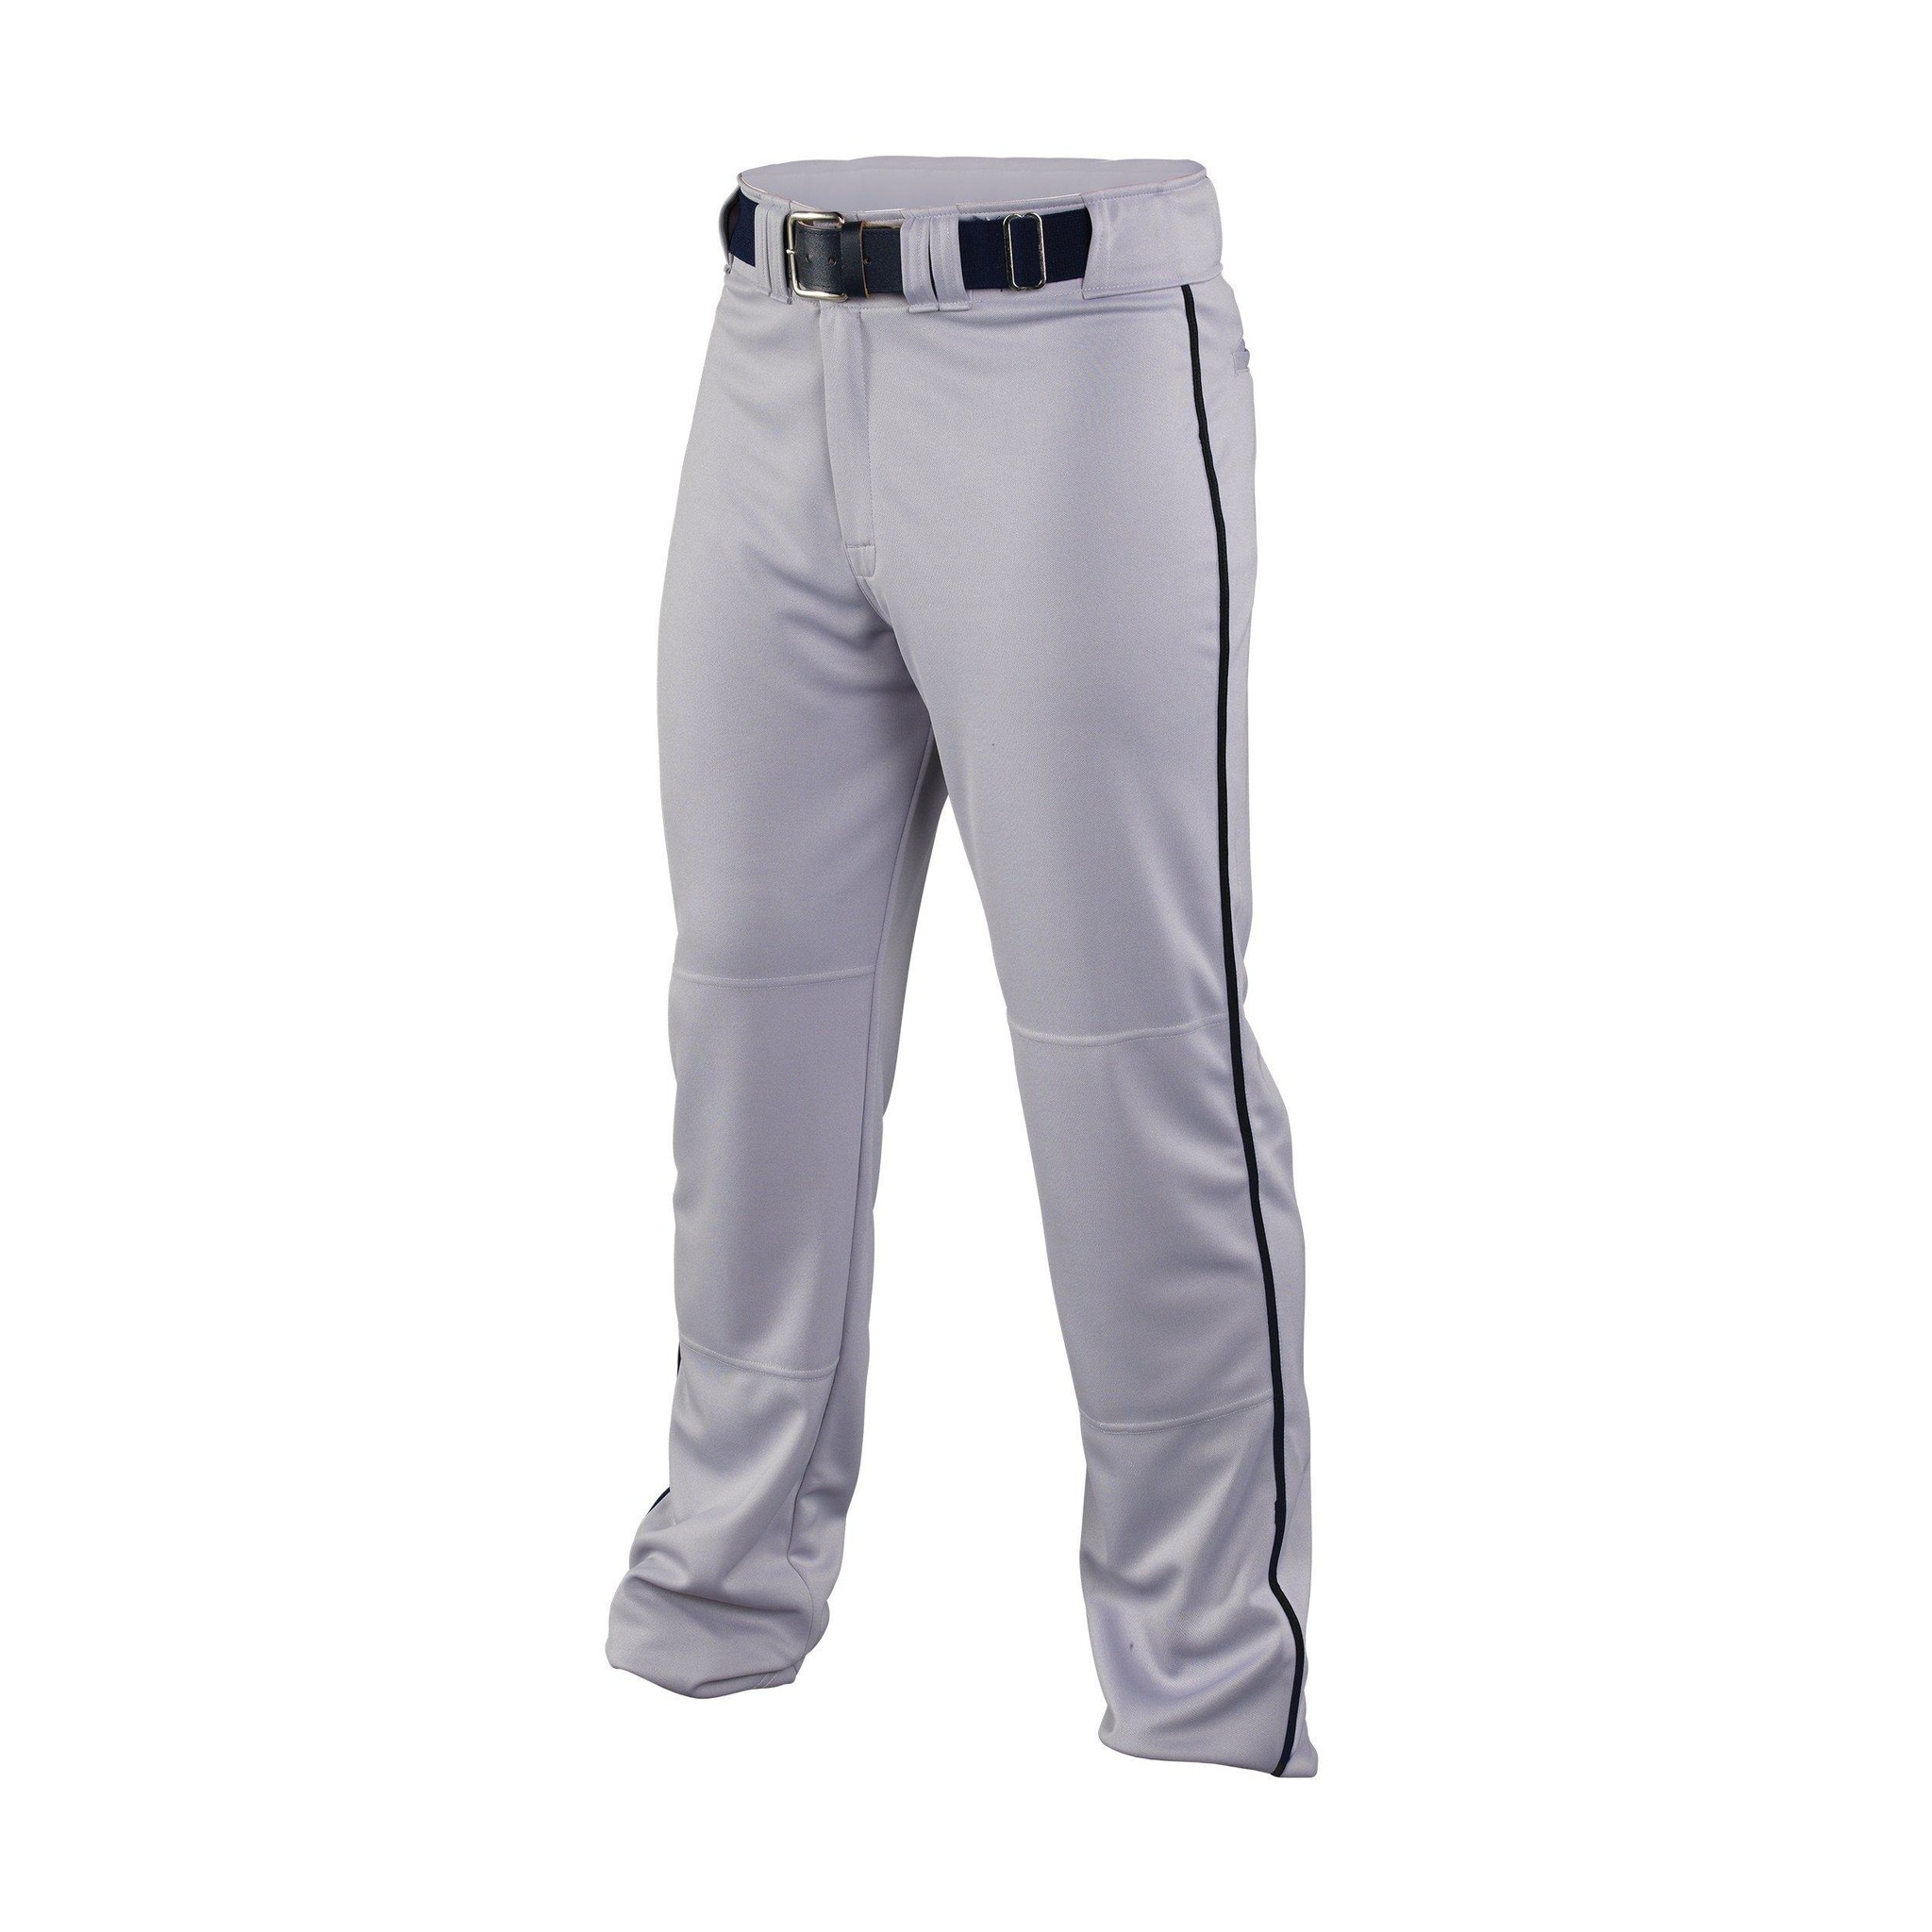 Piped Adult Knicker Baseball Double-Reinforced Knee Pants Easton Rival 